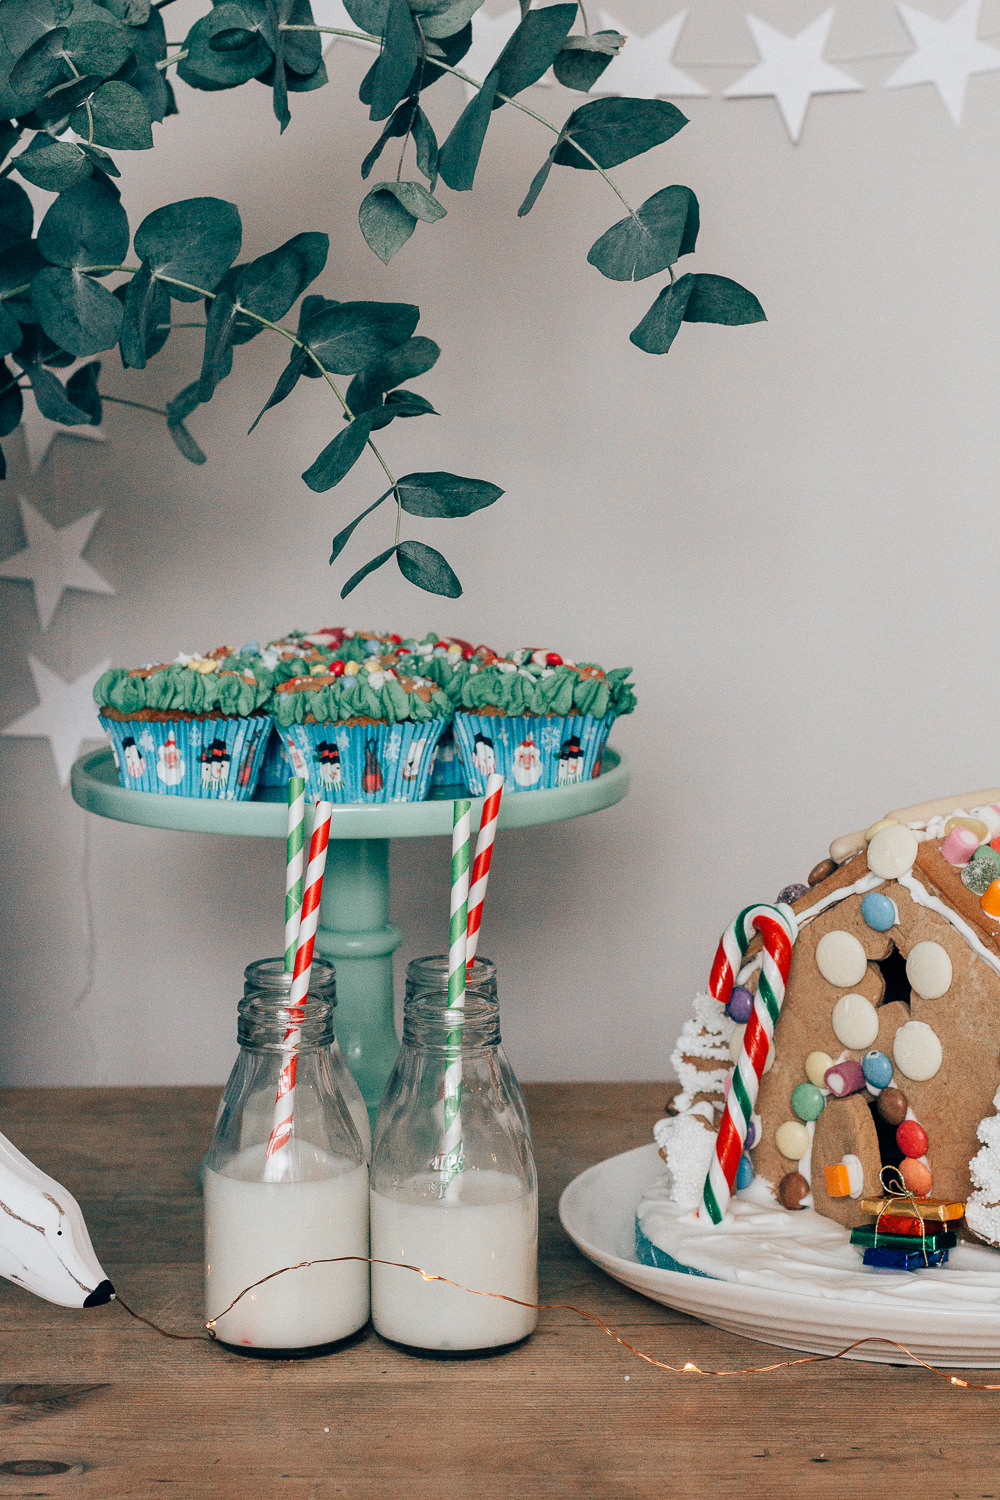 Festive desert table with gingerbread house, Christmas cupcakes and milk bottles